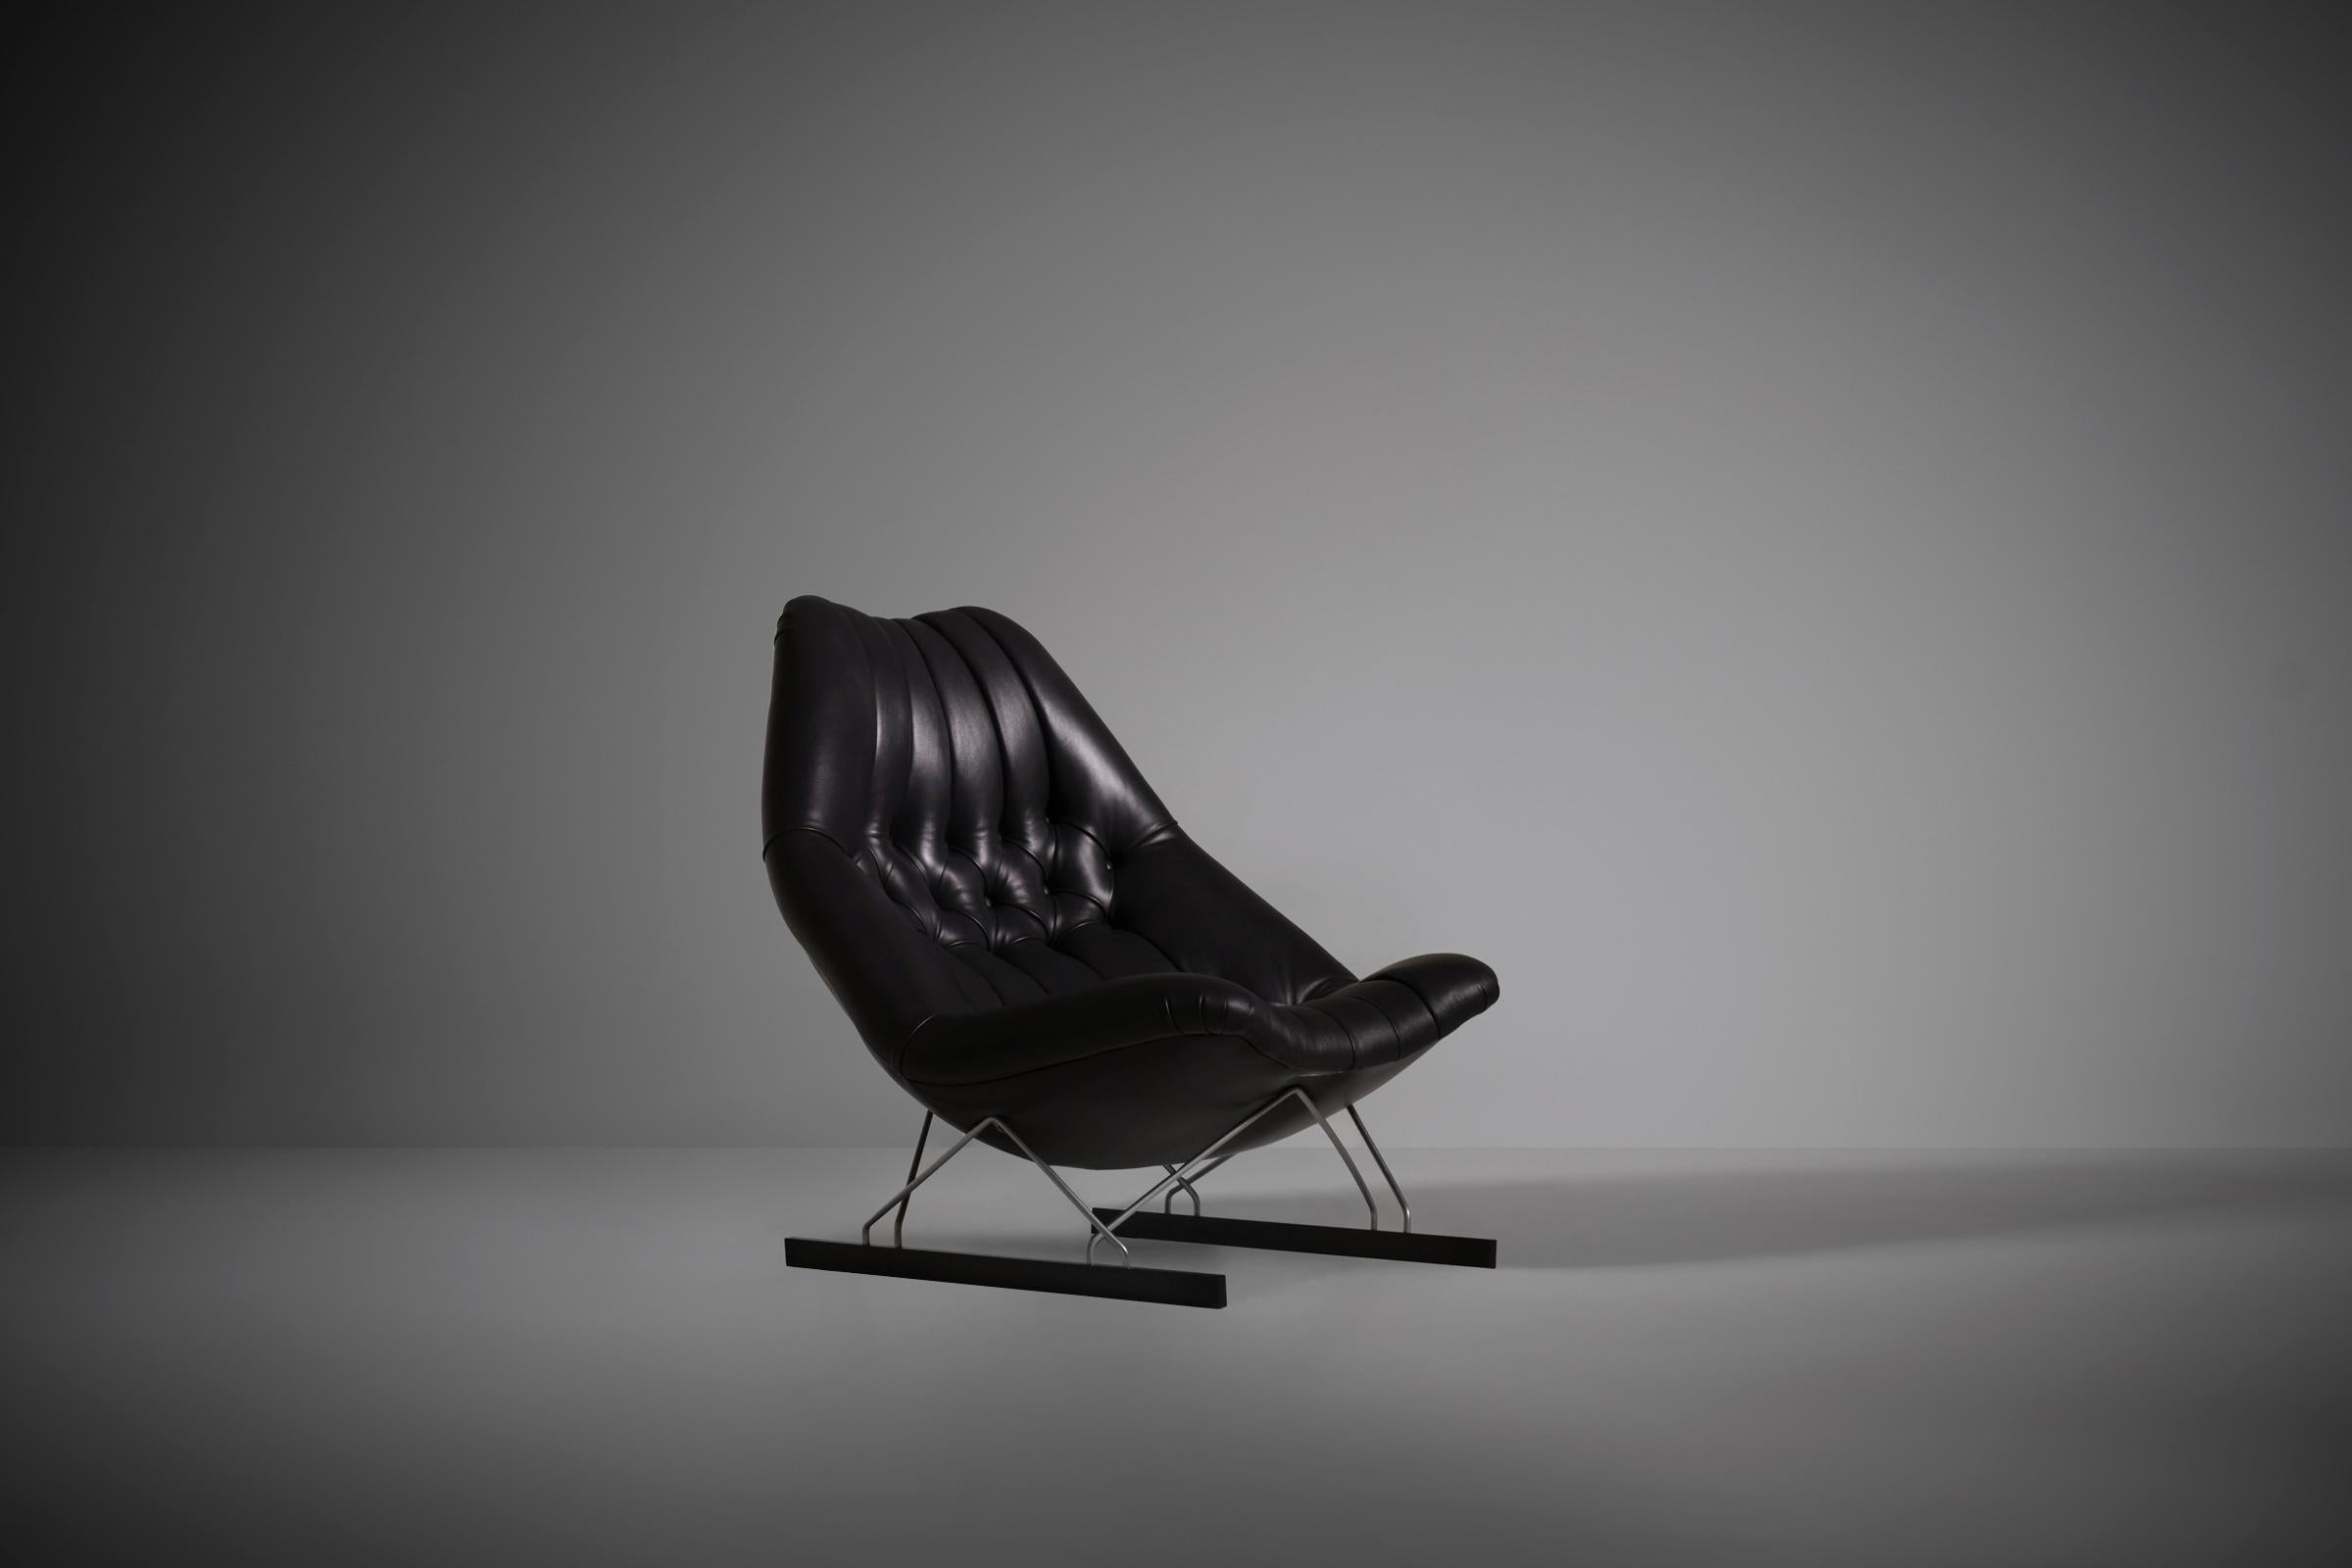 Rare 'F592' lounge chair by Geoffrey Harcourt for Artifort, the Netherlands 1966. The chair was only produced between 1966-1969 in a very small number, less than 100. The chair is covered with a beautiful soft aniline leather. Both leather and foam